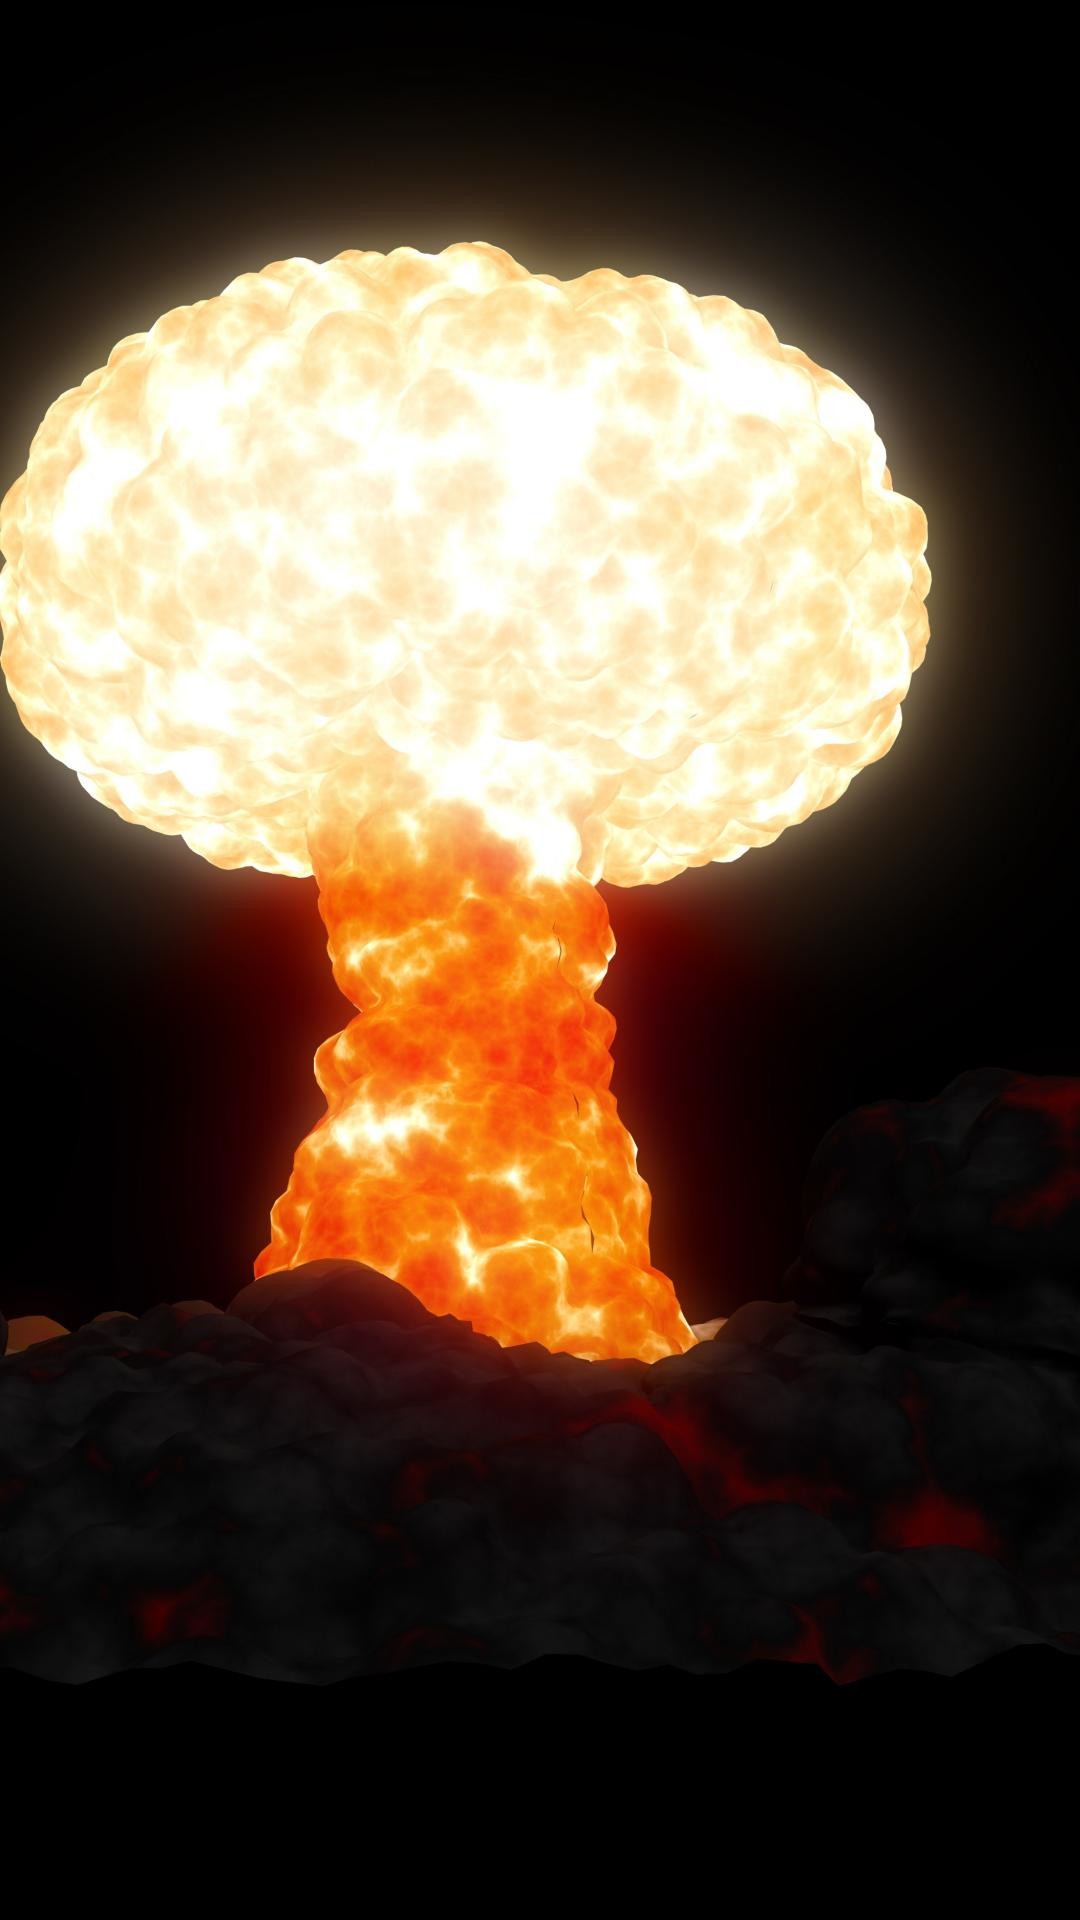 1080x1920 1920x1080 Explosion, The Atomic Bomb Wallpapers and Pictures